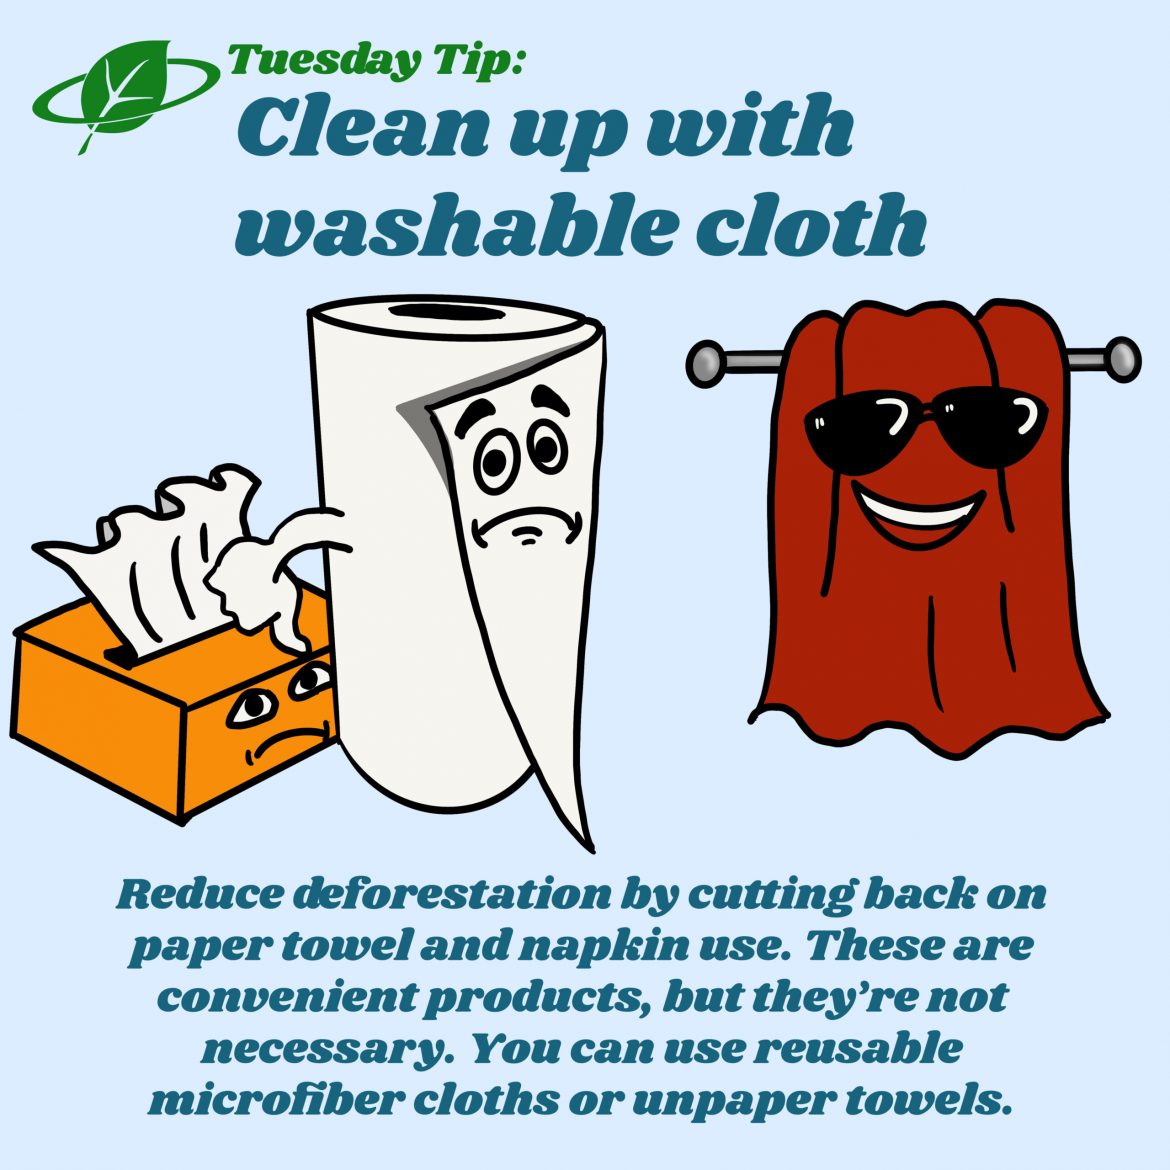 Clean up with washable cloth | Tuesday Tip